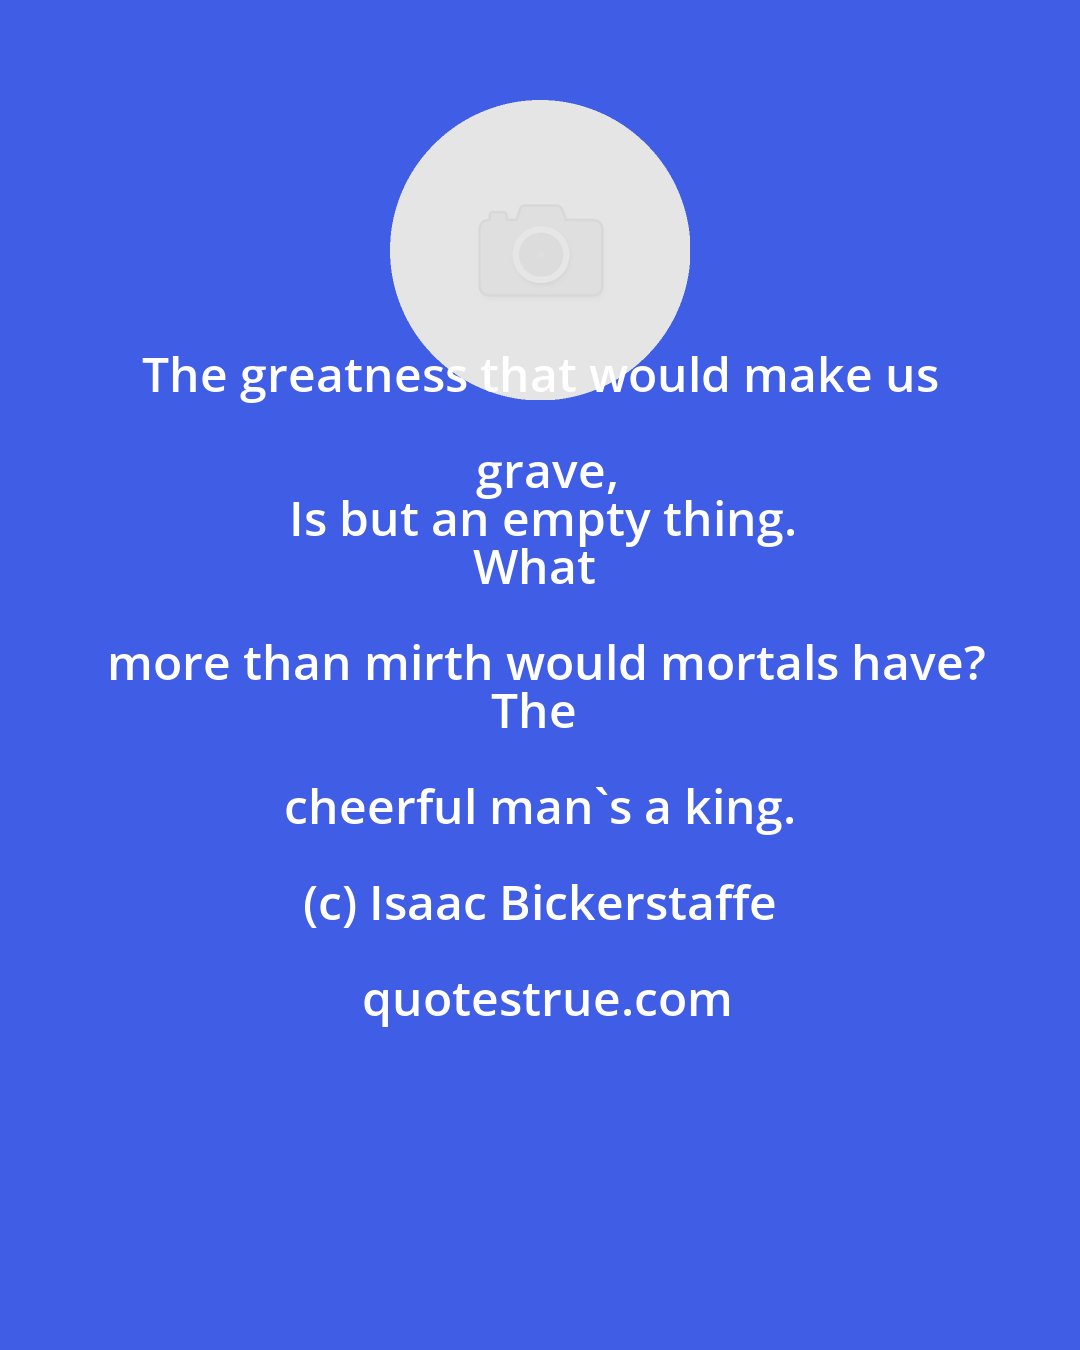 Isaac Bickerstaffe: The greatness that would make us grave,
Is but an empty thing.
What more than mirth would mortals have?
The cheerful man's a king.